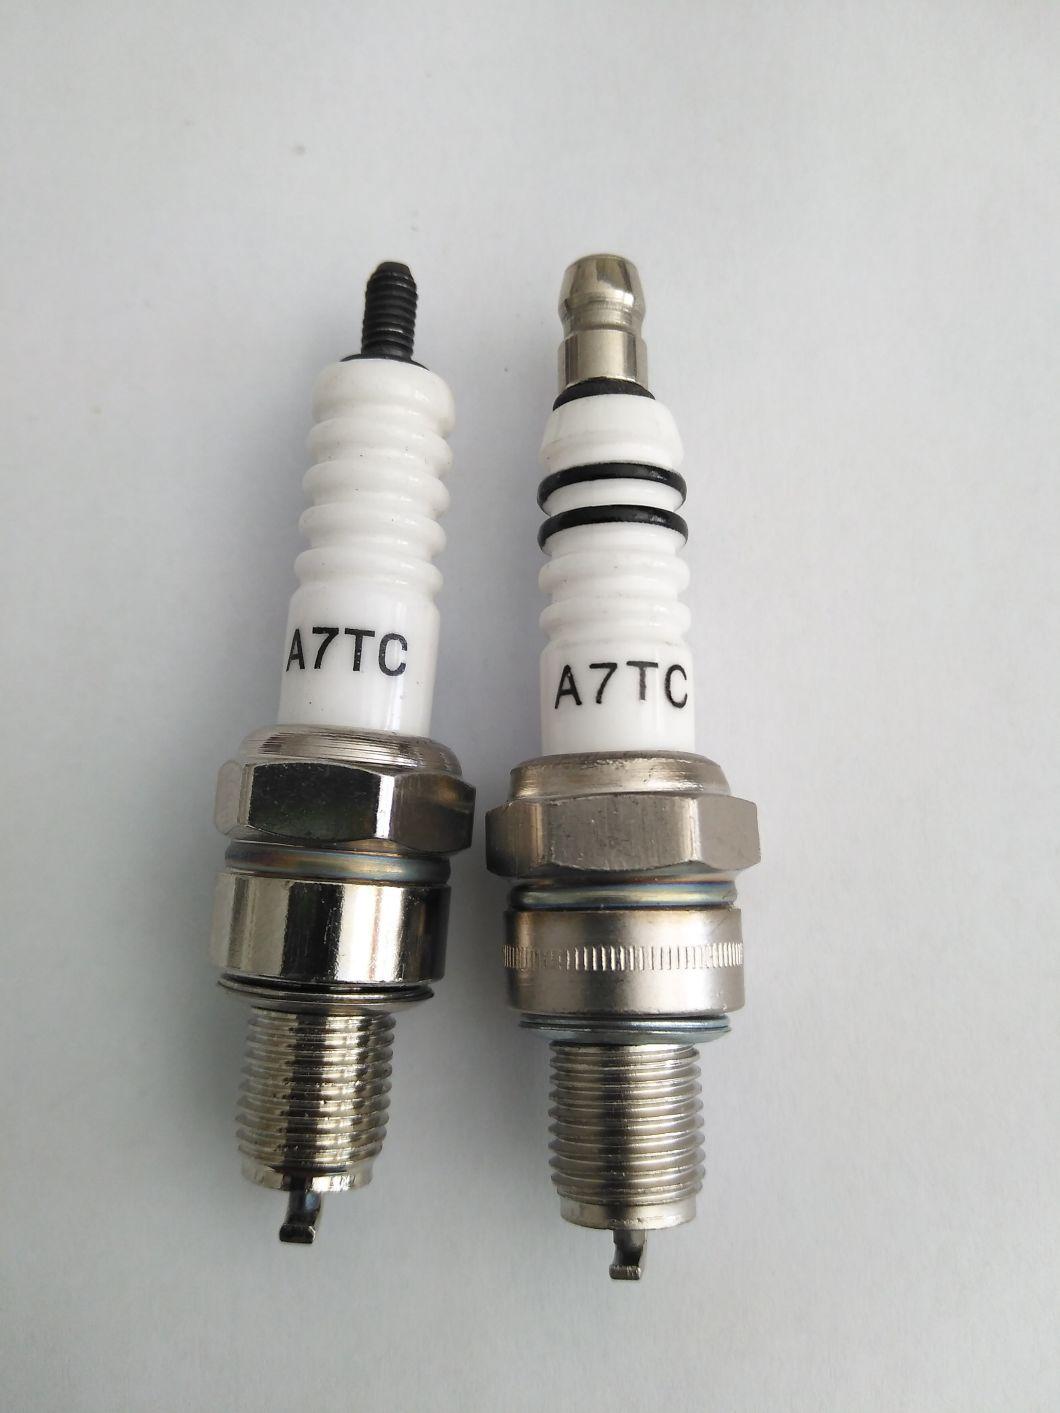 China Wholesale Car Spare Parts Motorcycle Engine Spark Plug